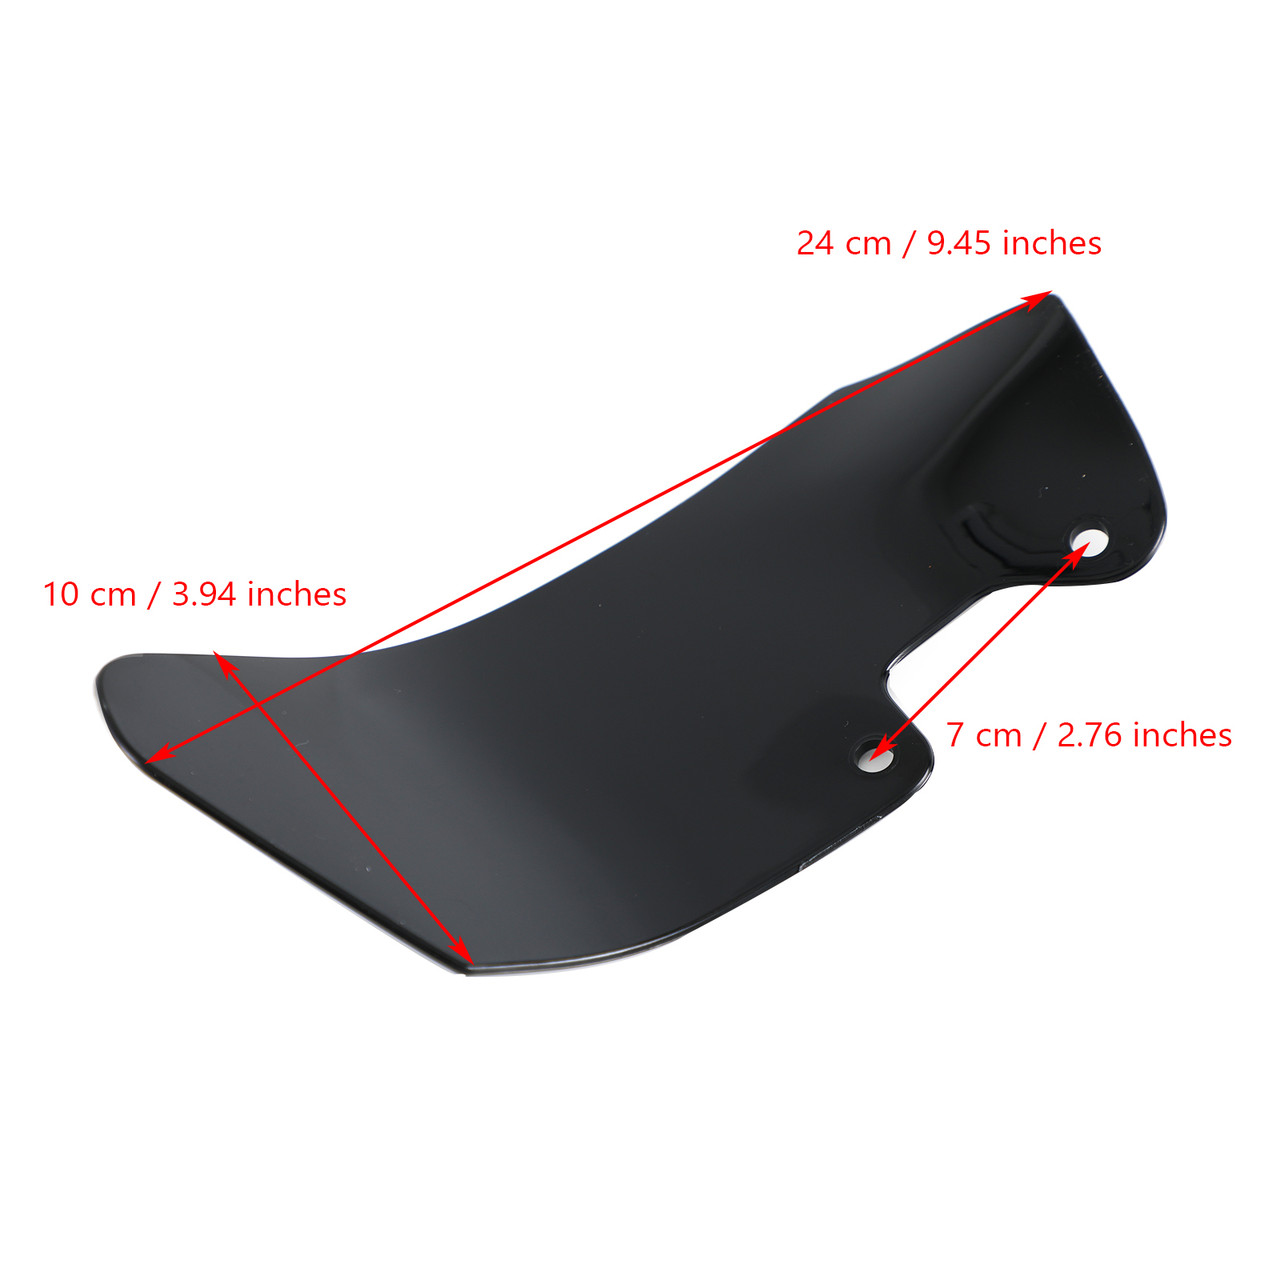 Windshield Plate Side Panels Fit for BMW R1200GS R1200 ADV K51 Adventure 2006-2013 Black